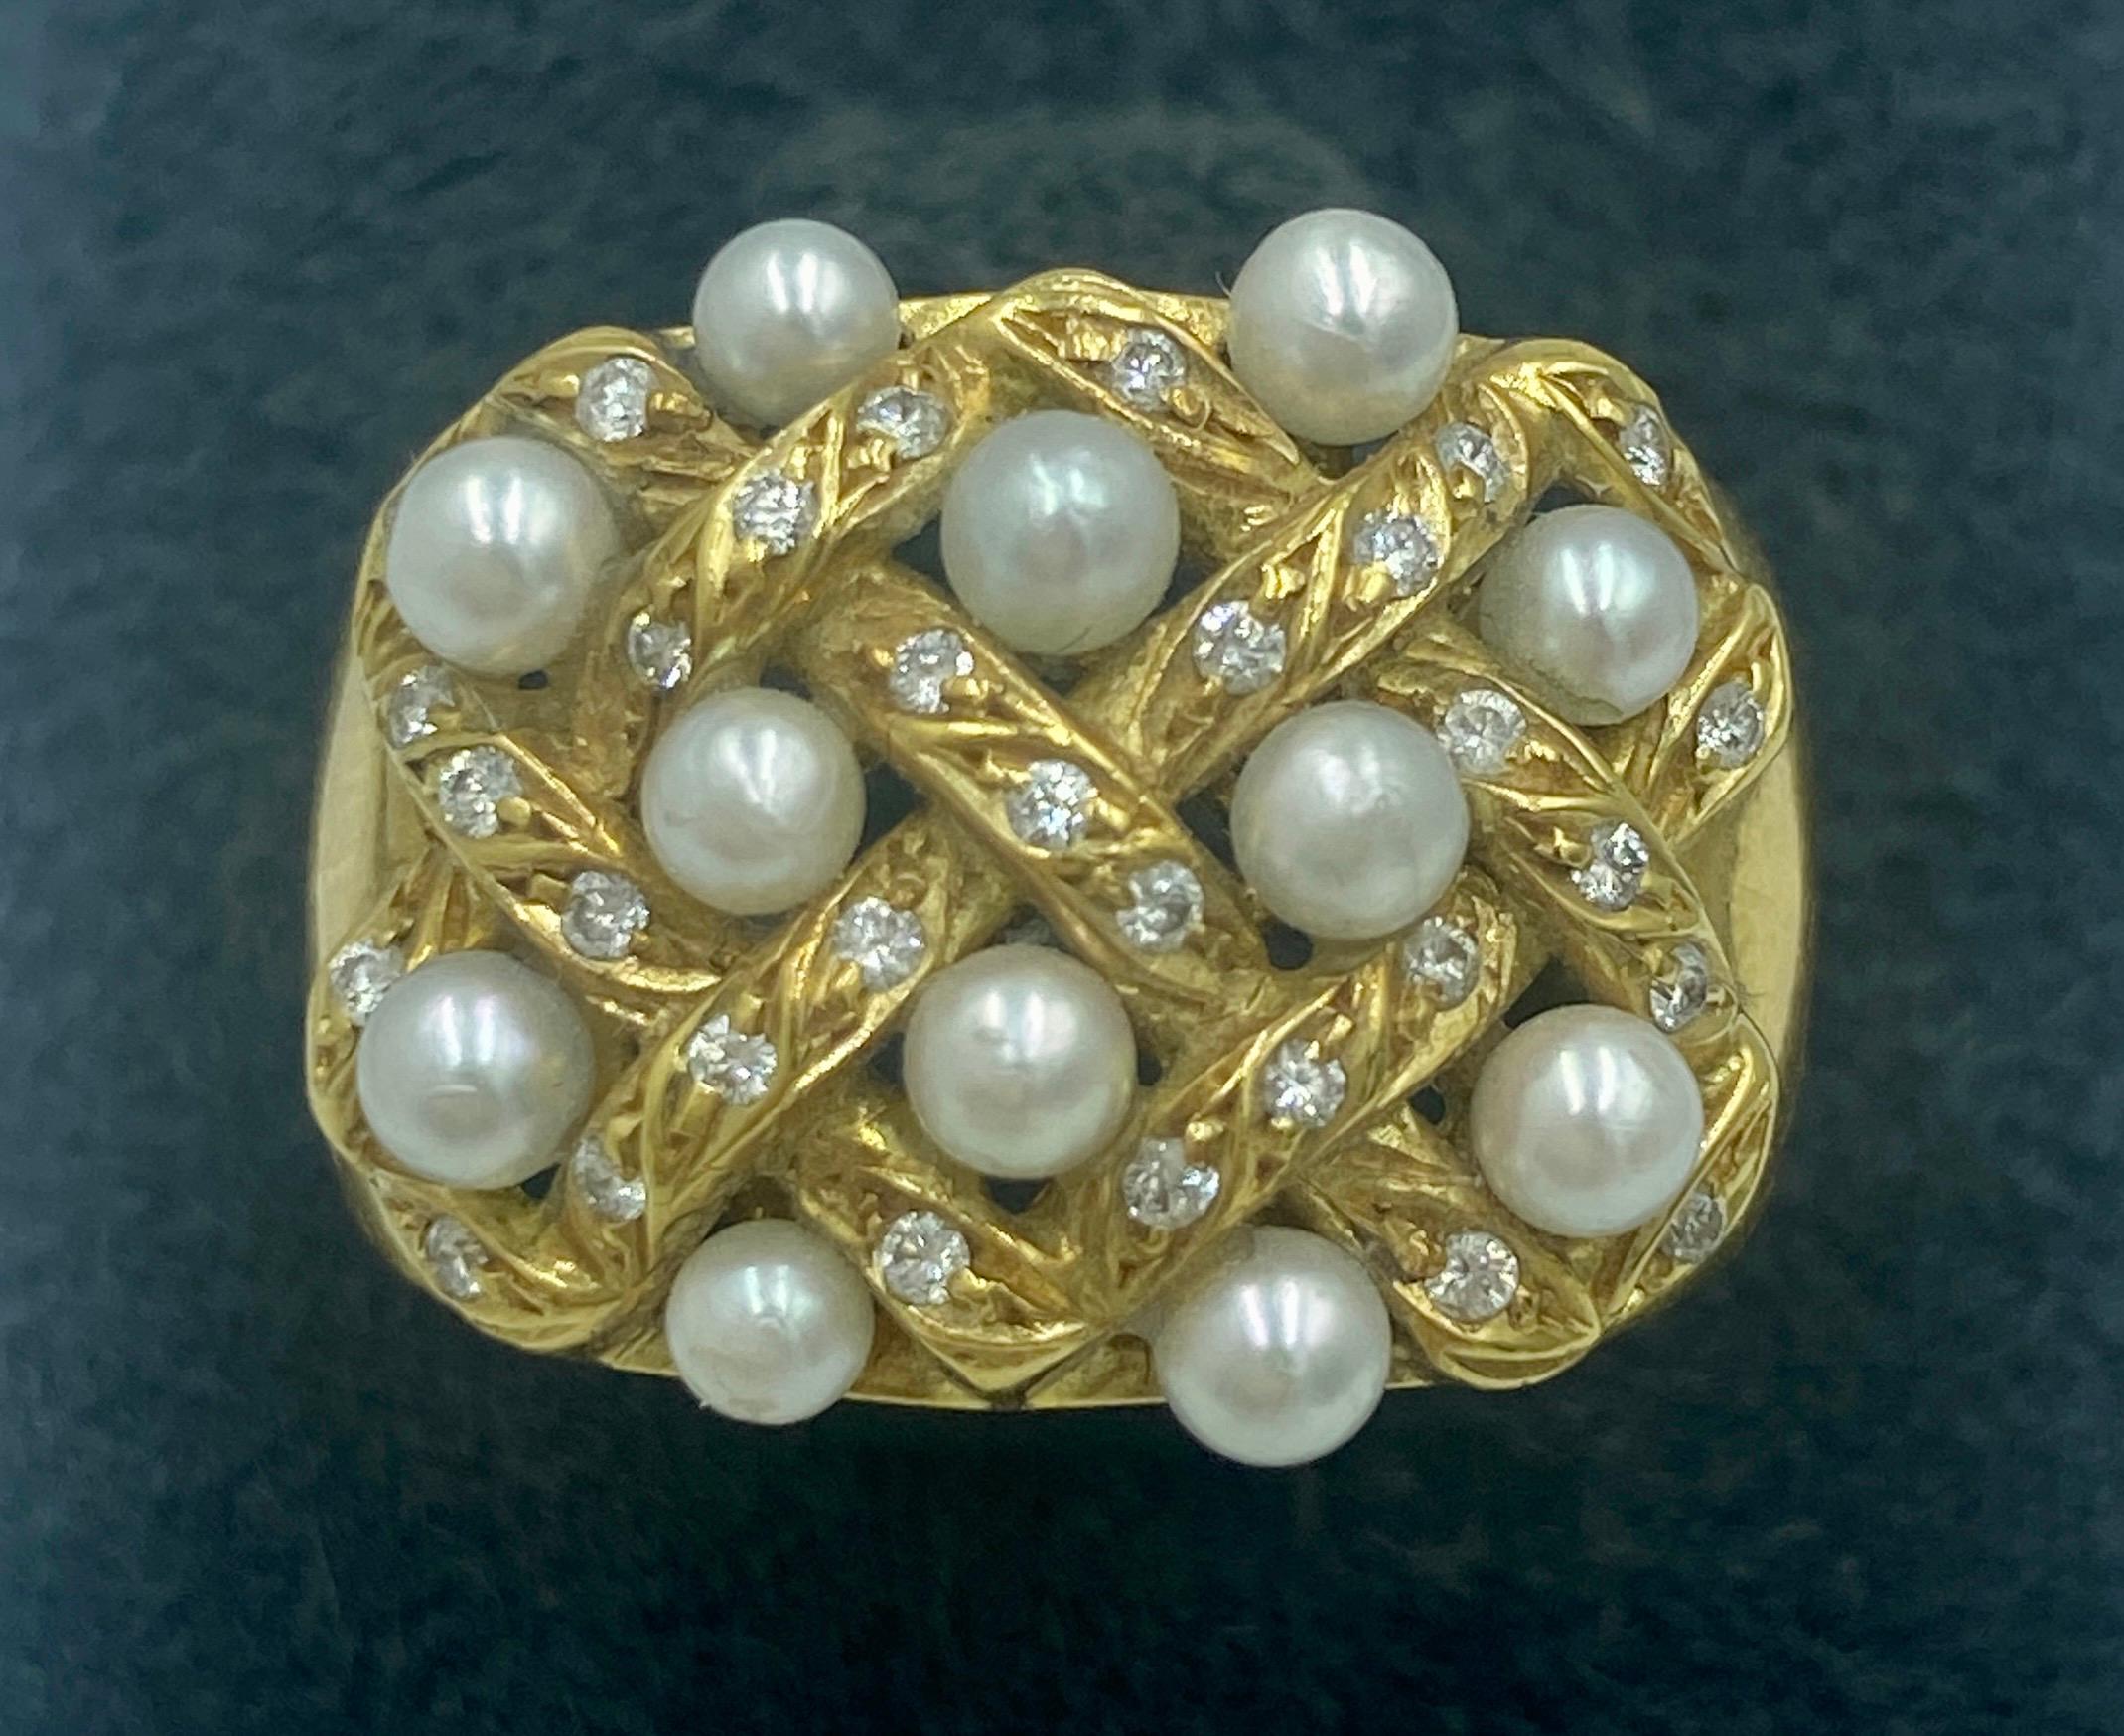 This delightful 1970s Portuguese cocktail ring is made of 800 gold and is adorned with cultured pearls and approximately 0.3 carats diamonds. It is a beautifully made, charming piece.